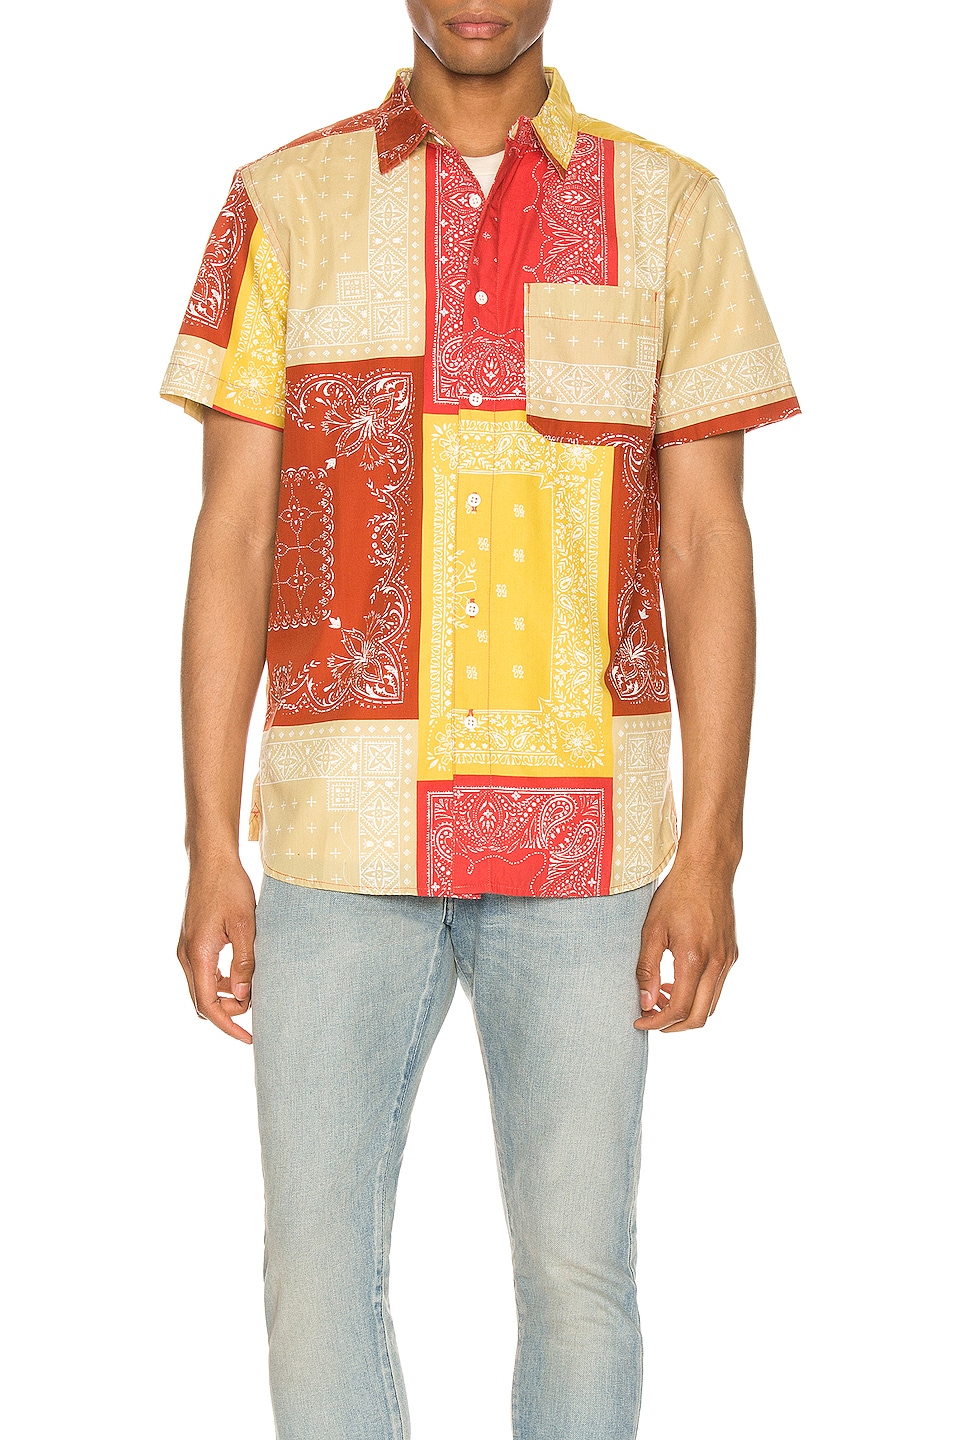 Image 1 of The North Face Short Sleeve Baytrail Pattern Shirt in Sunbaked Red Bandana Renewal Multi Print